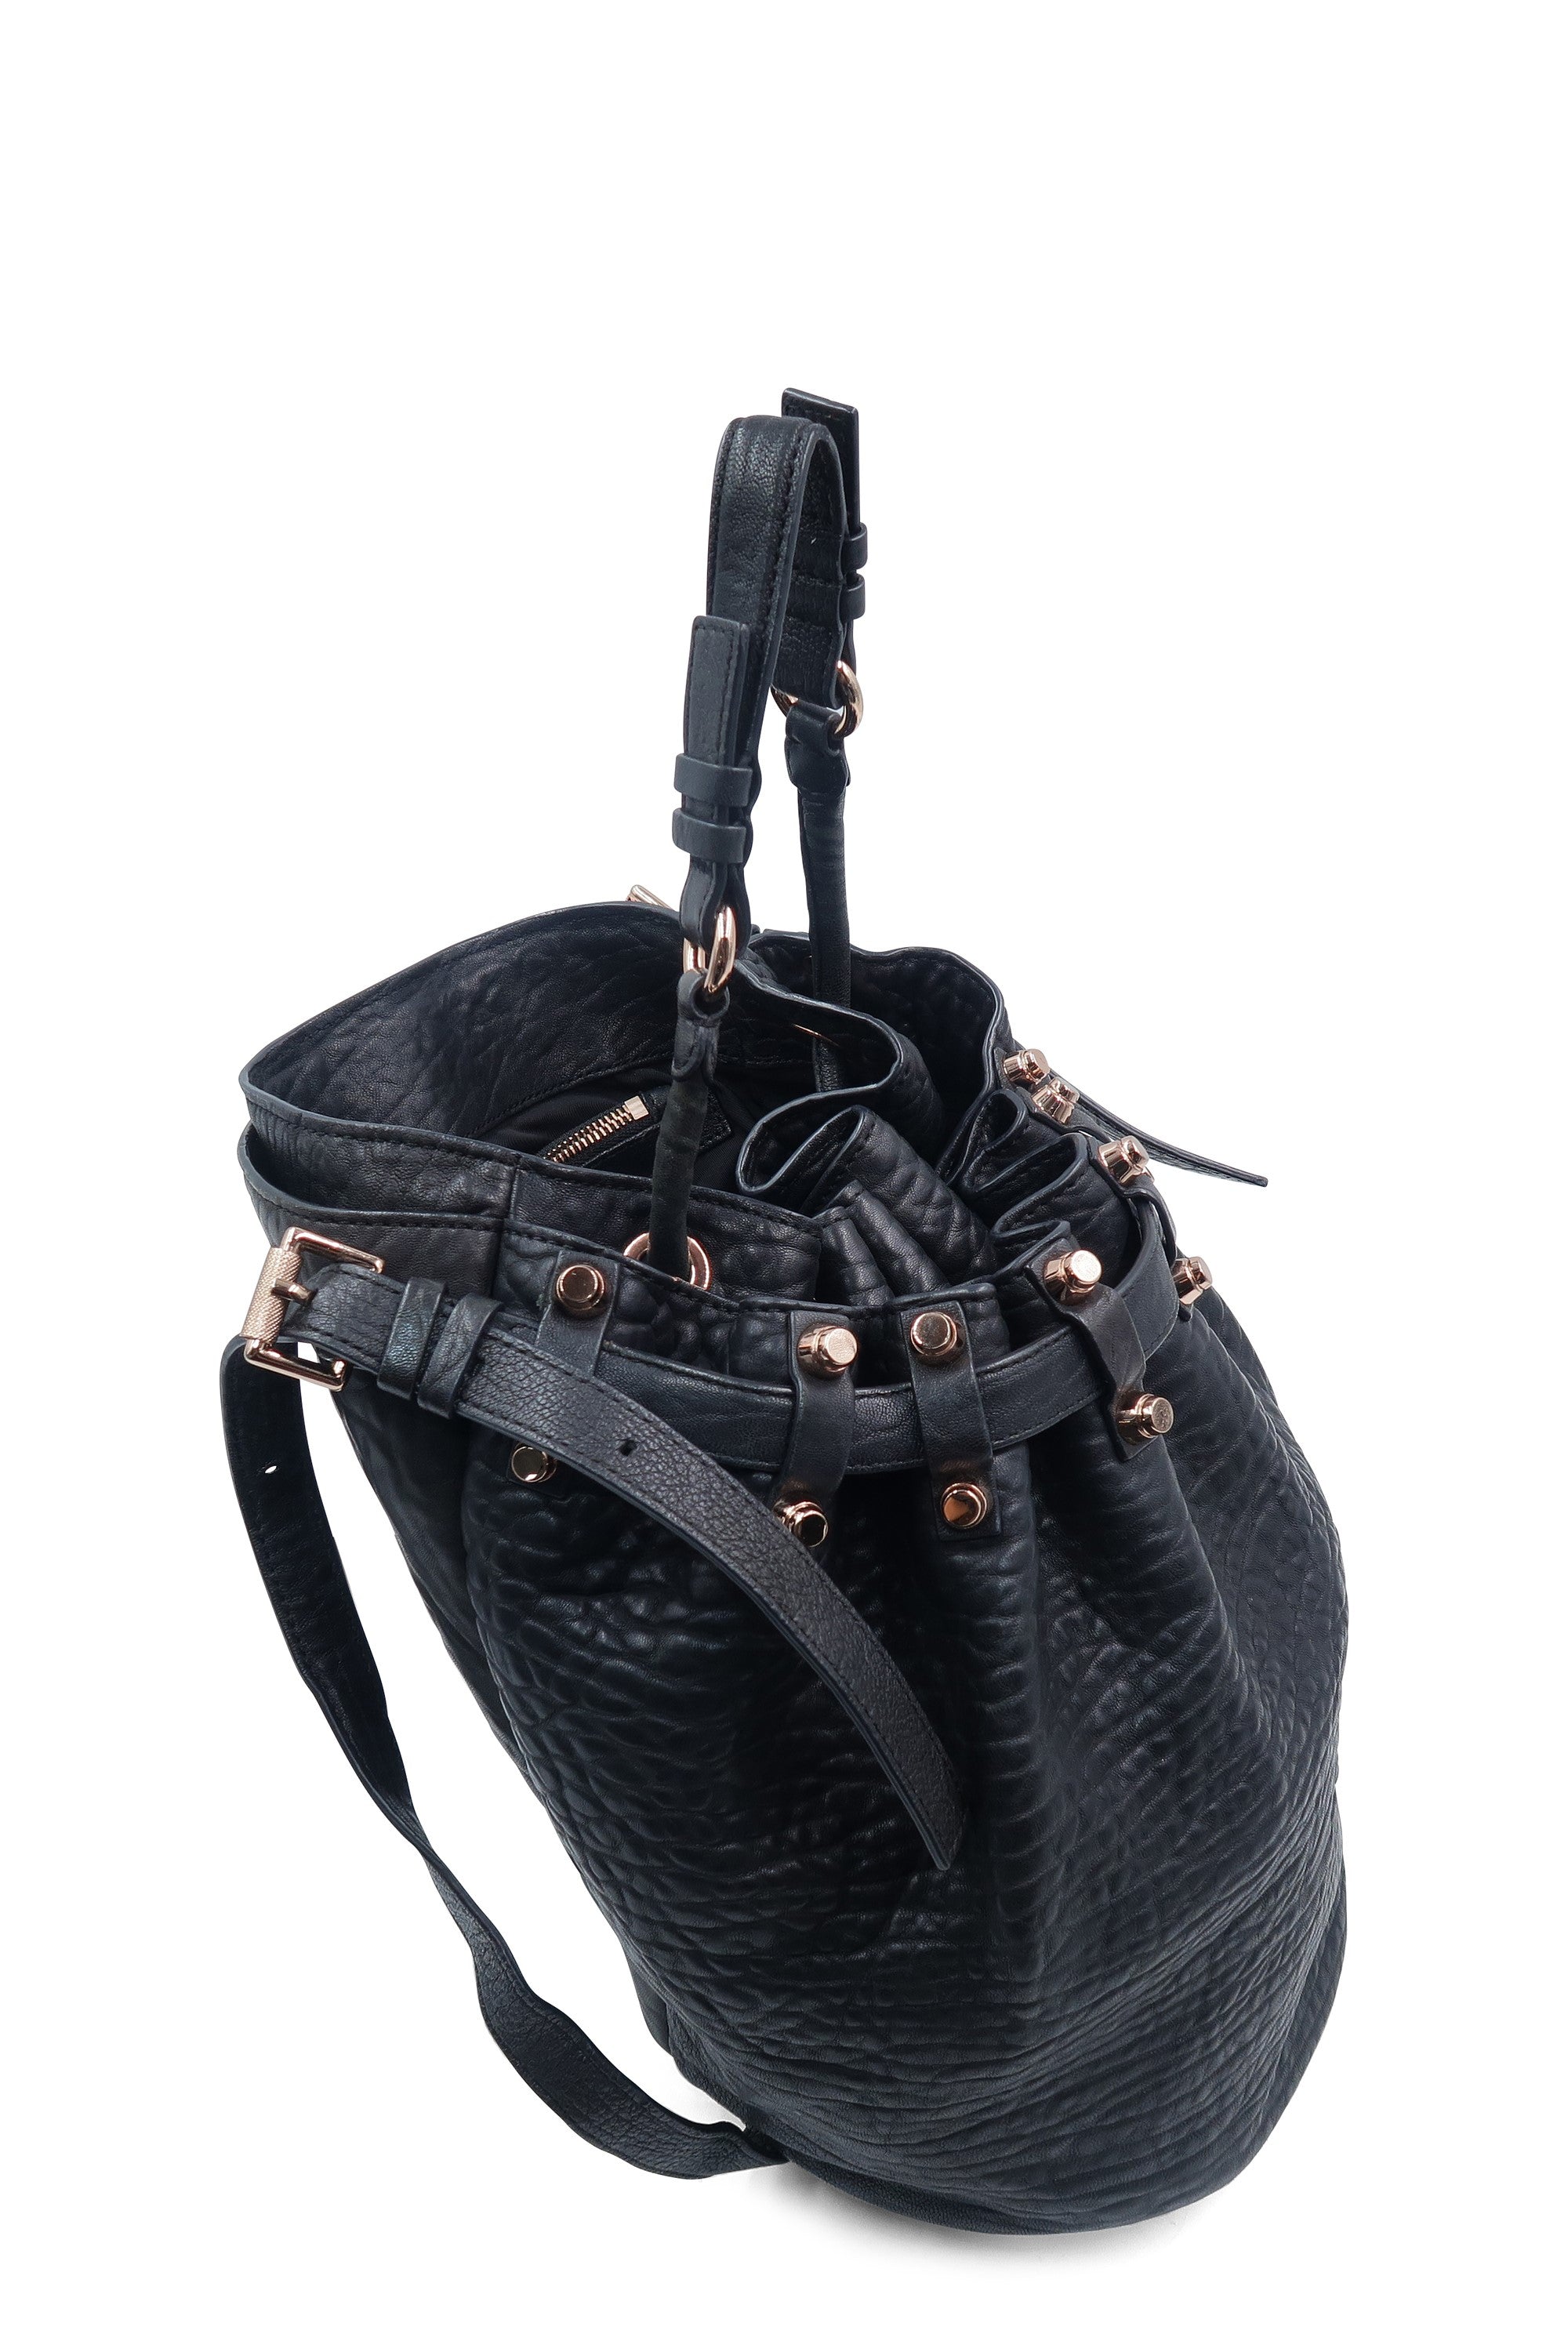 Buy Authentic, Preloved Alexander Wang Diego Bucket Bag Black Bags Second Edit by Style Theory